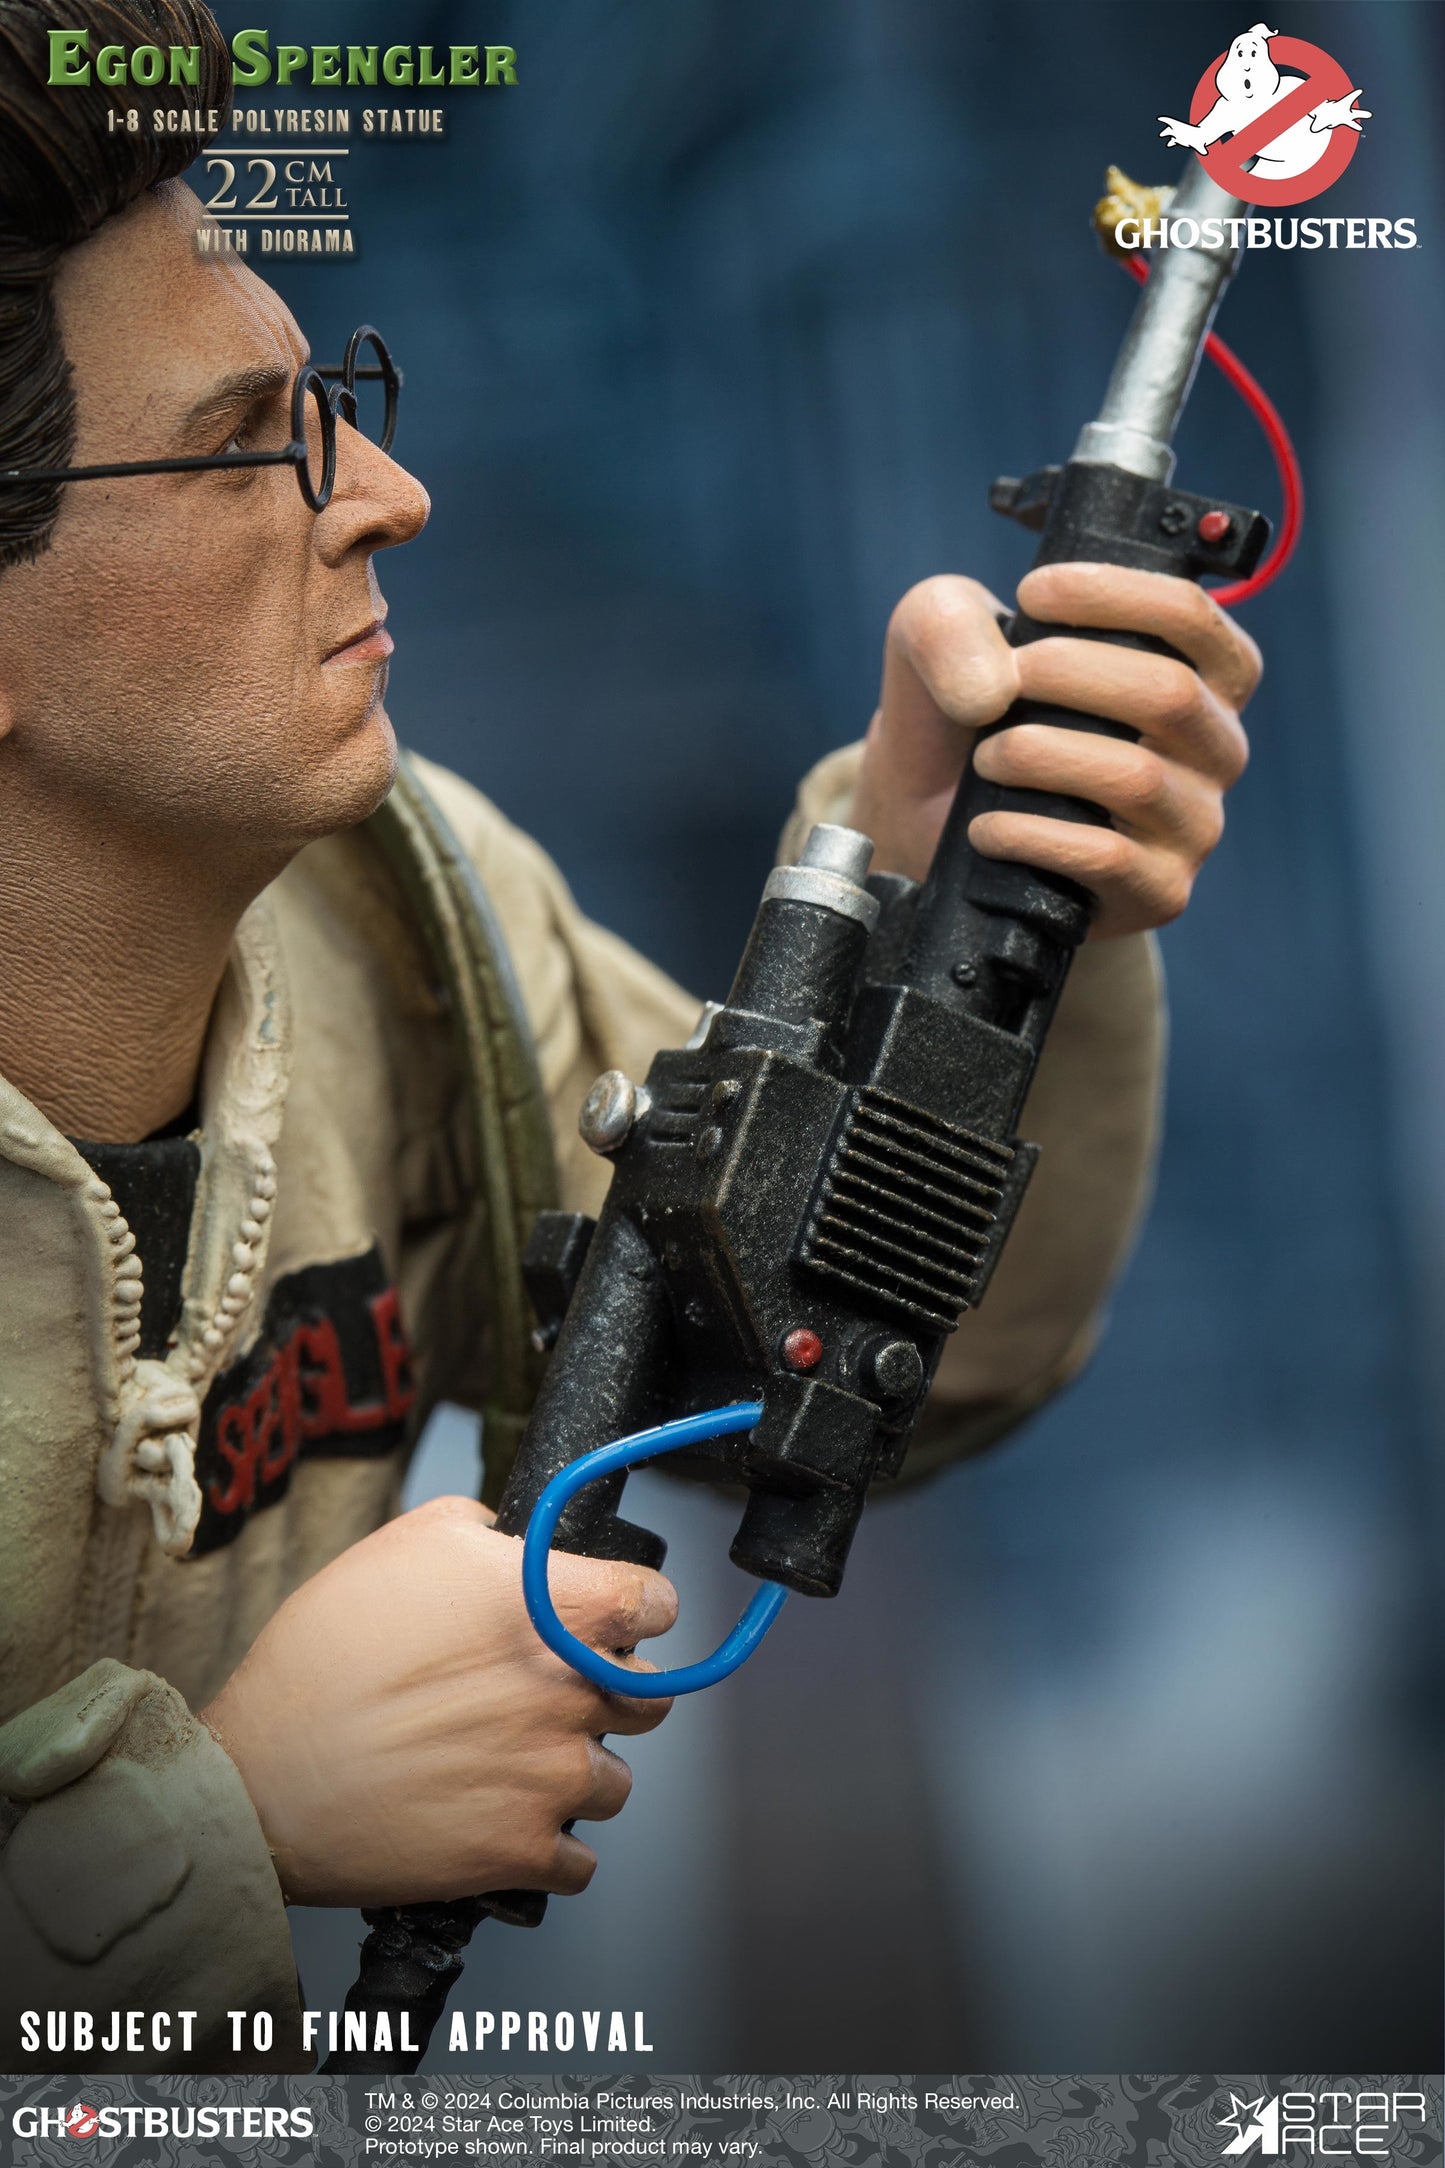 GHOSTBUSTERS EGON SPENGLER 1/8 SCALE POLYRESIN STATUE